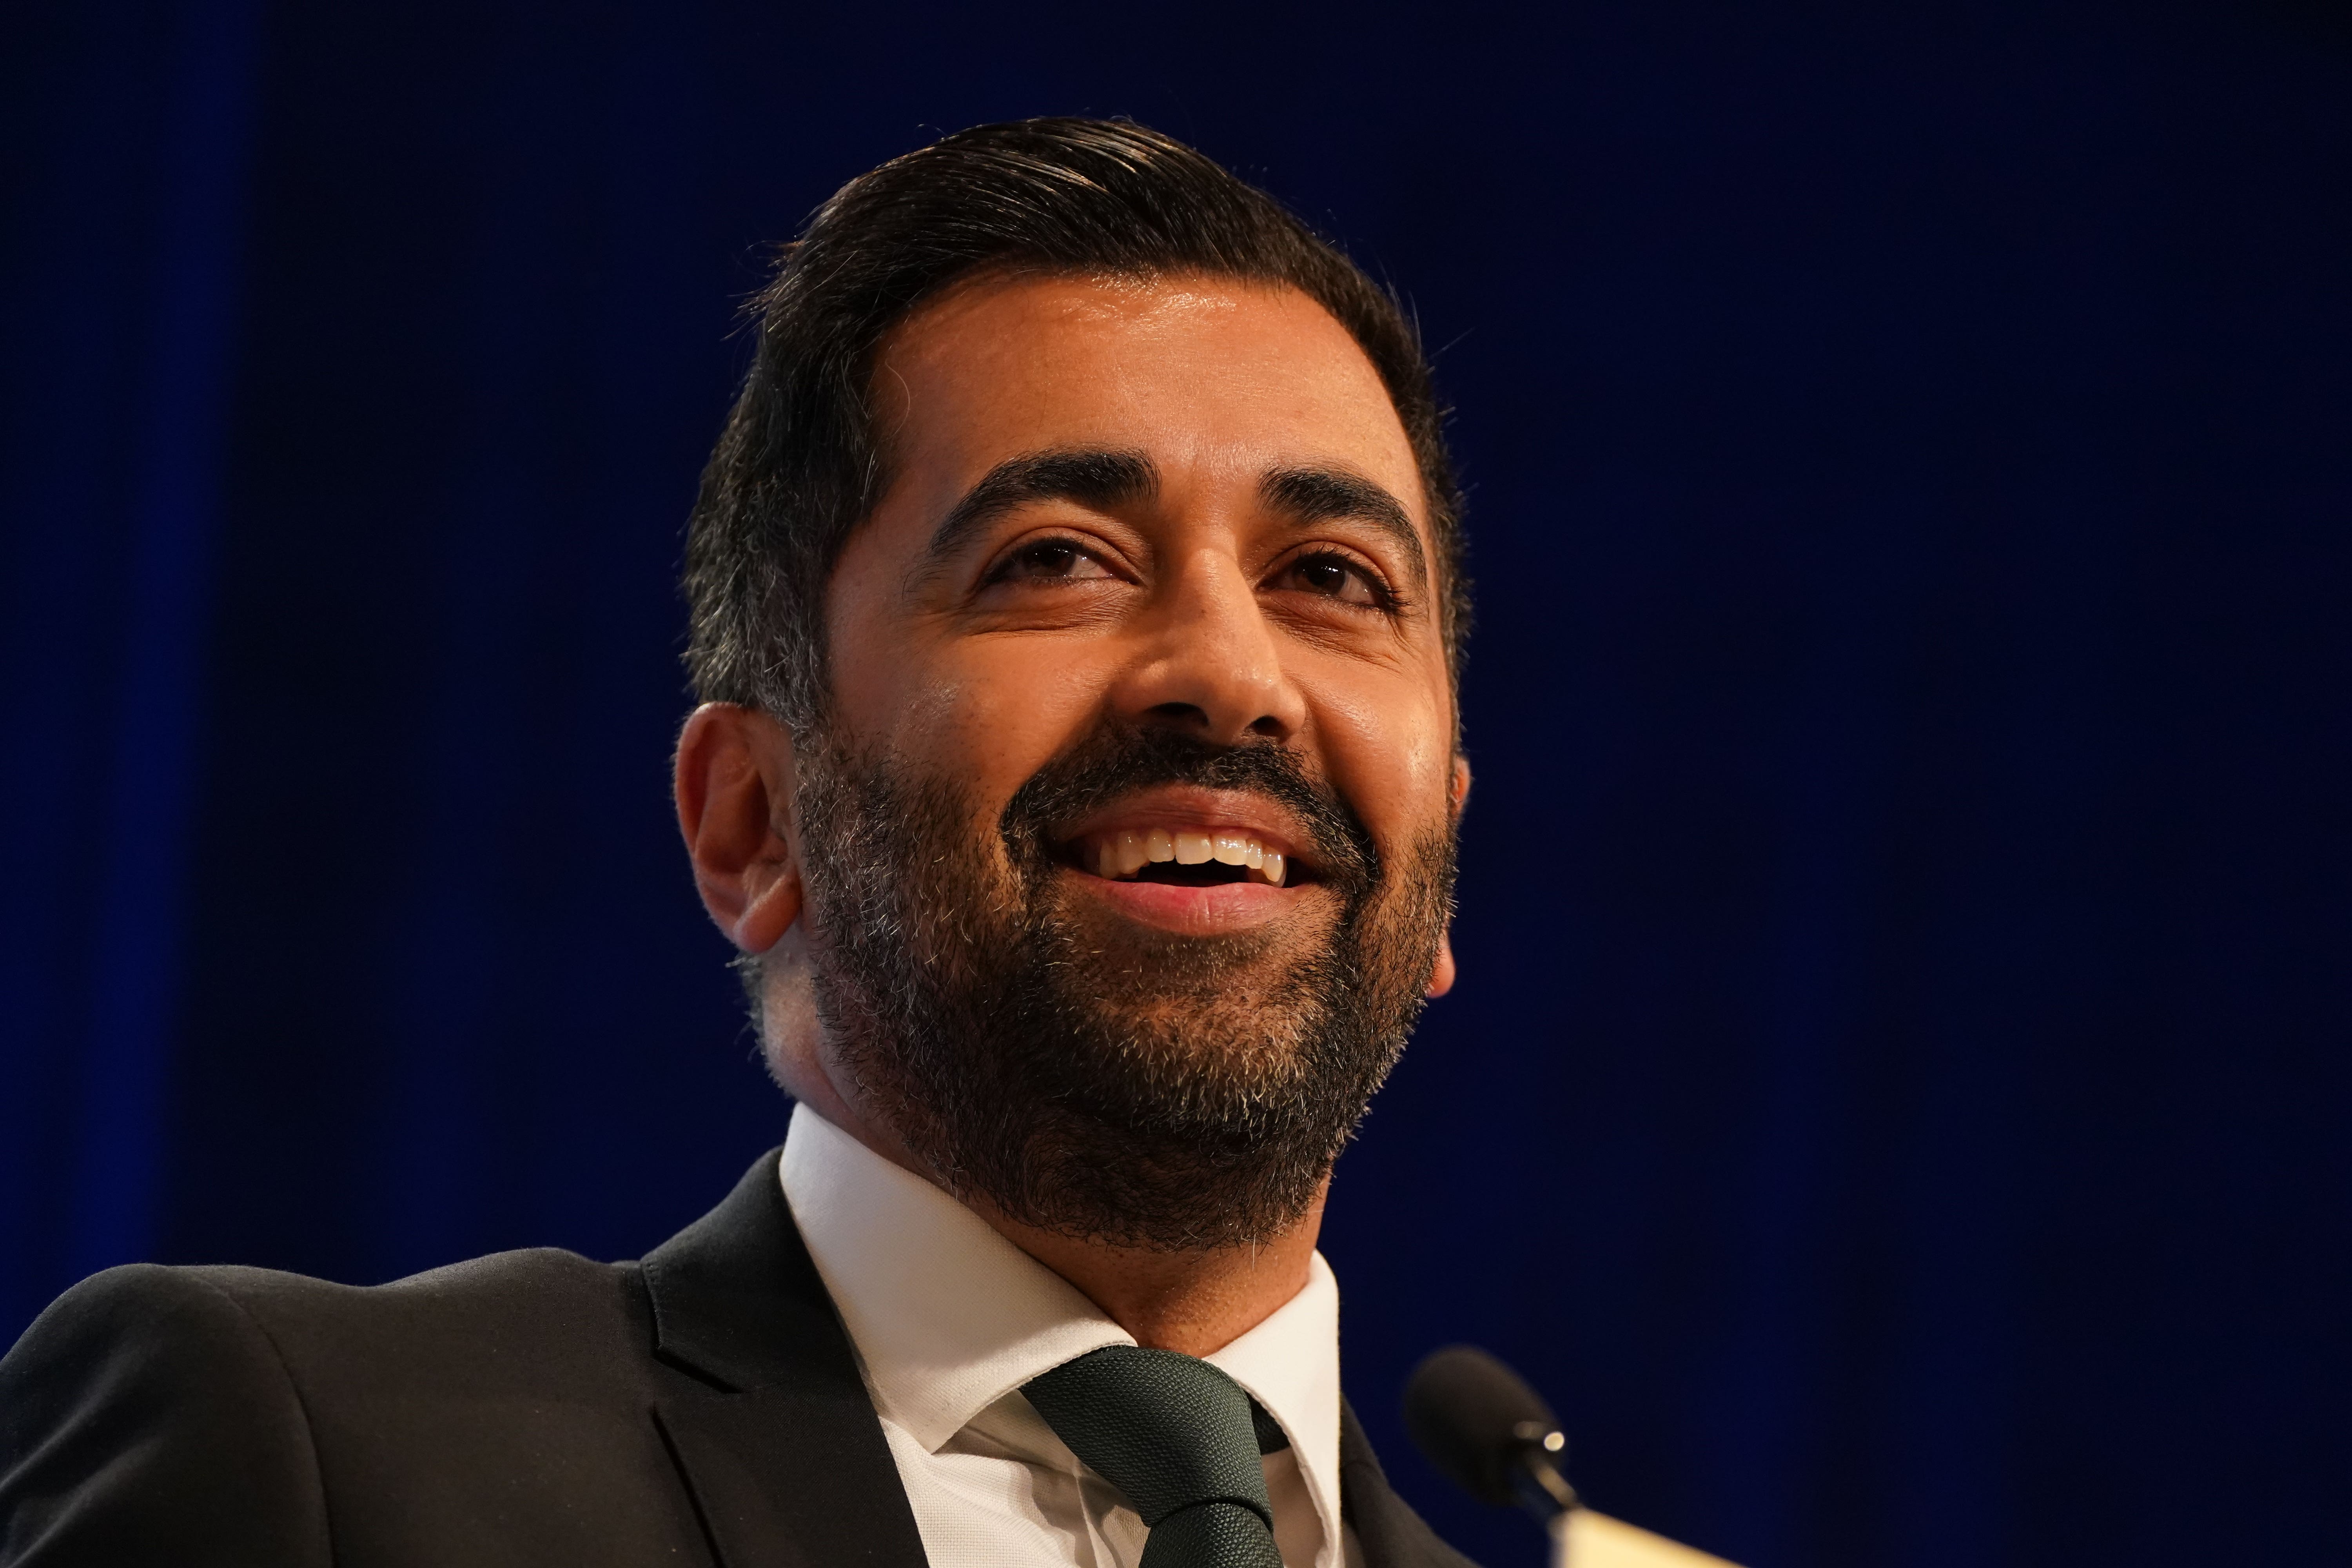 First minister Humza Yousaf announced a freeze in council tax for Scots next year as he closed the SNP conference in Aberdeen